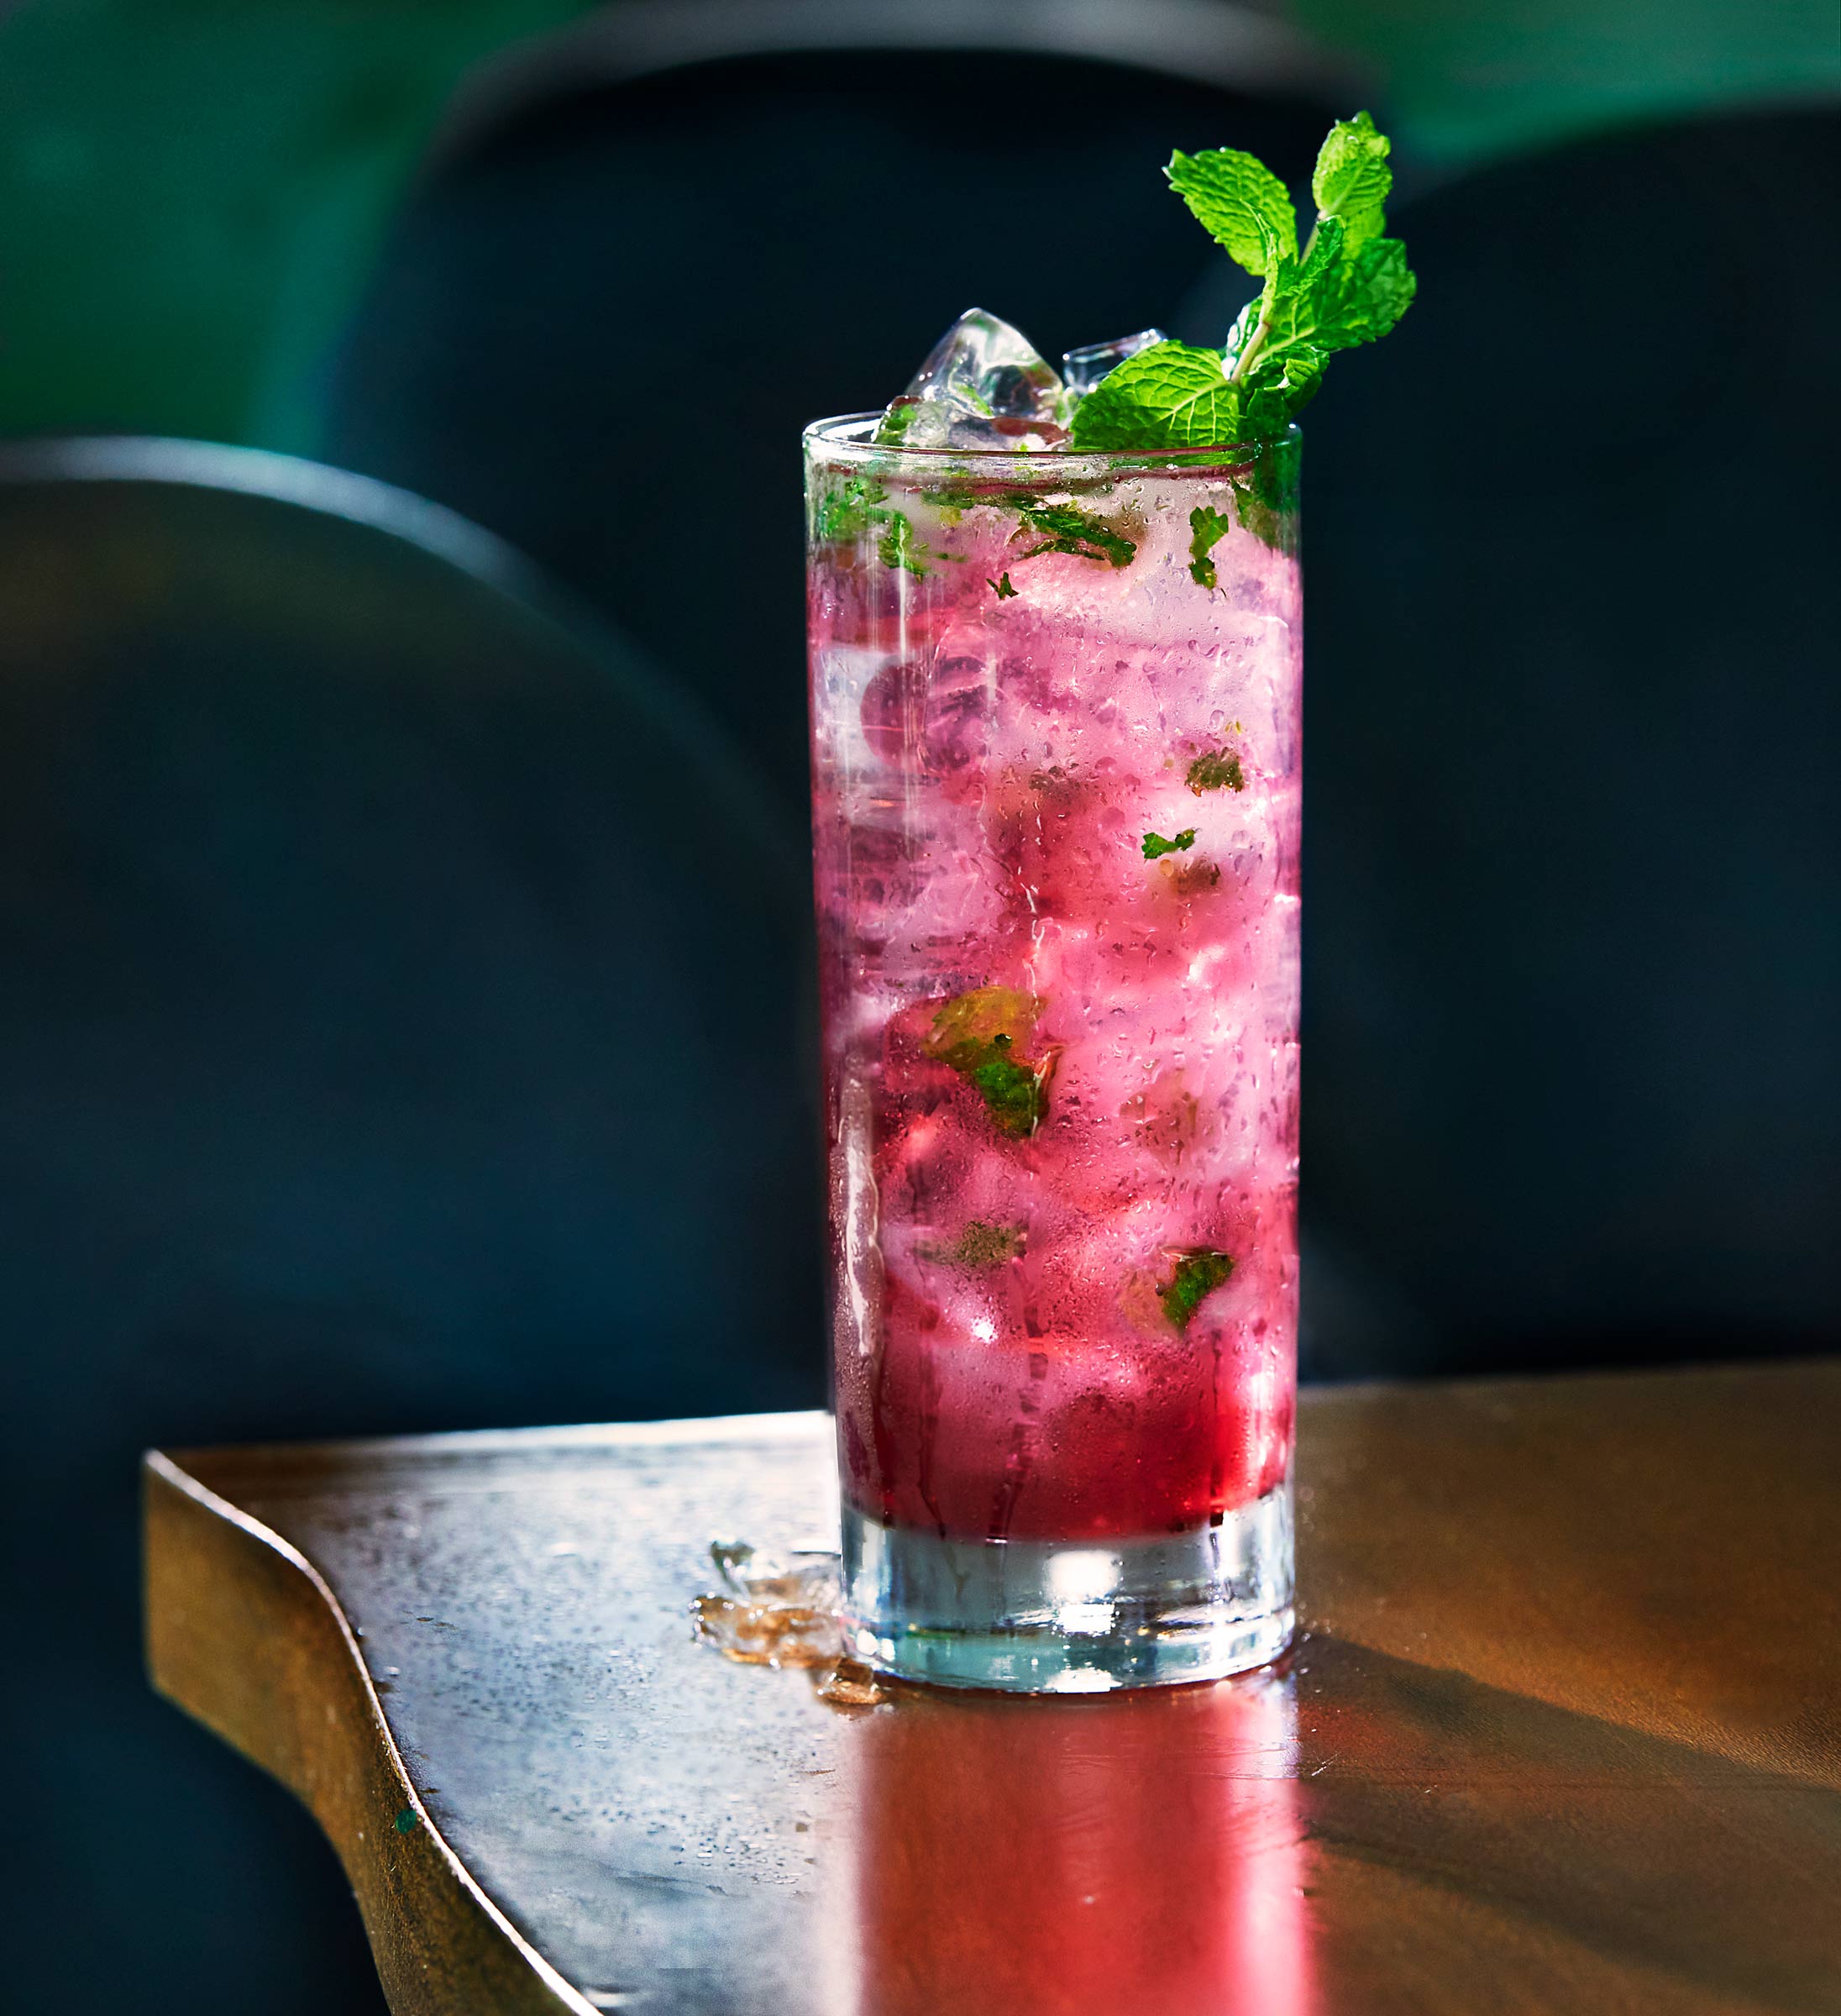 Watermelon Red Bull Mojito with Aristocrat Rum, Watermelon Red Bull, agave, muddled mint and lime. - Thai Essane Nashville